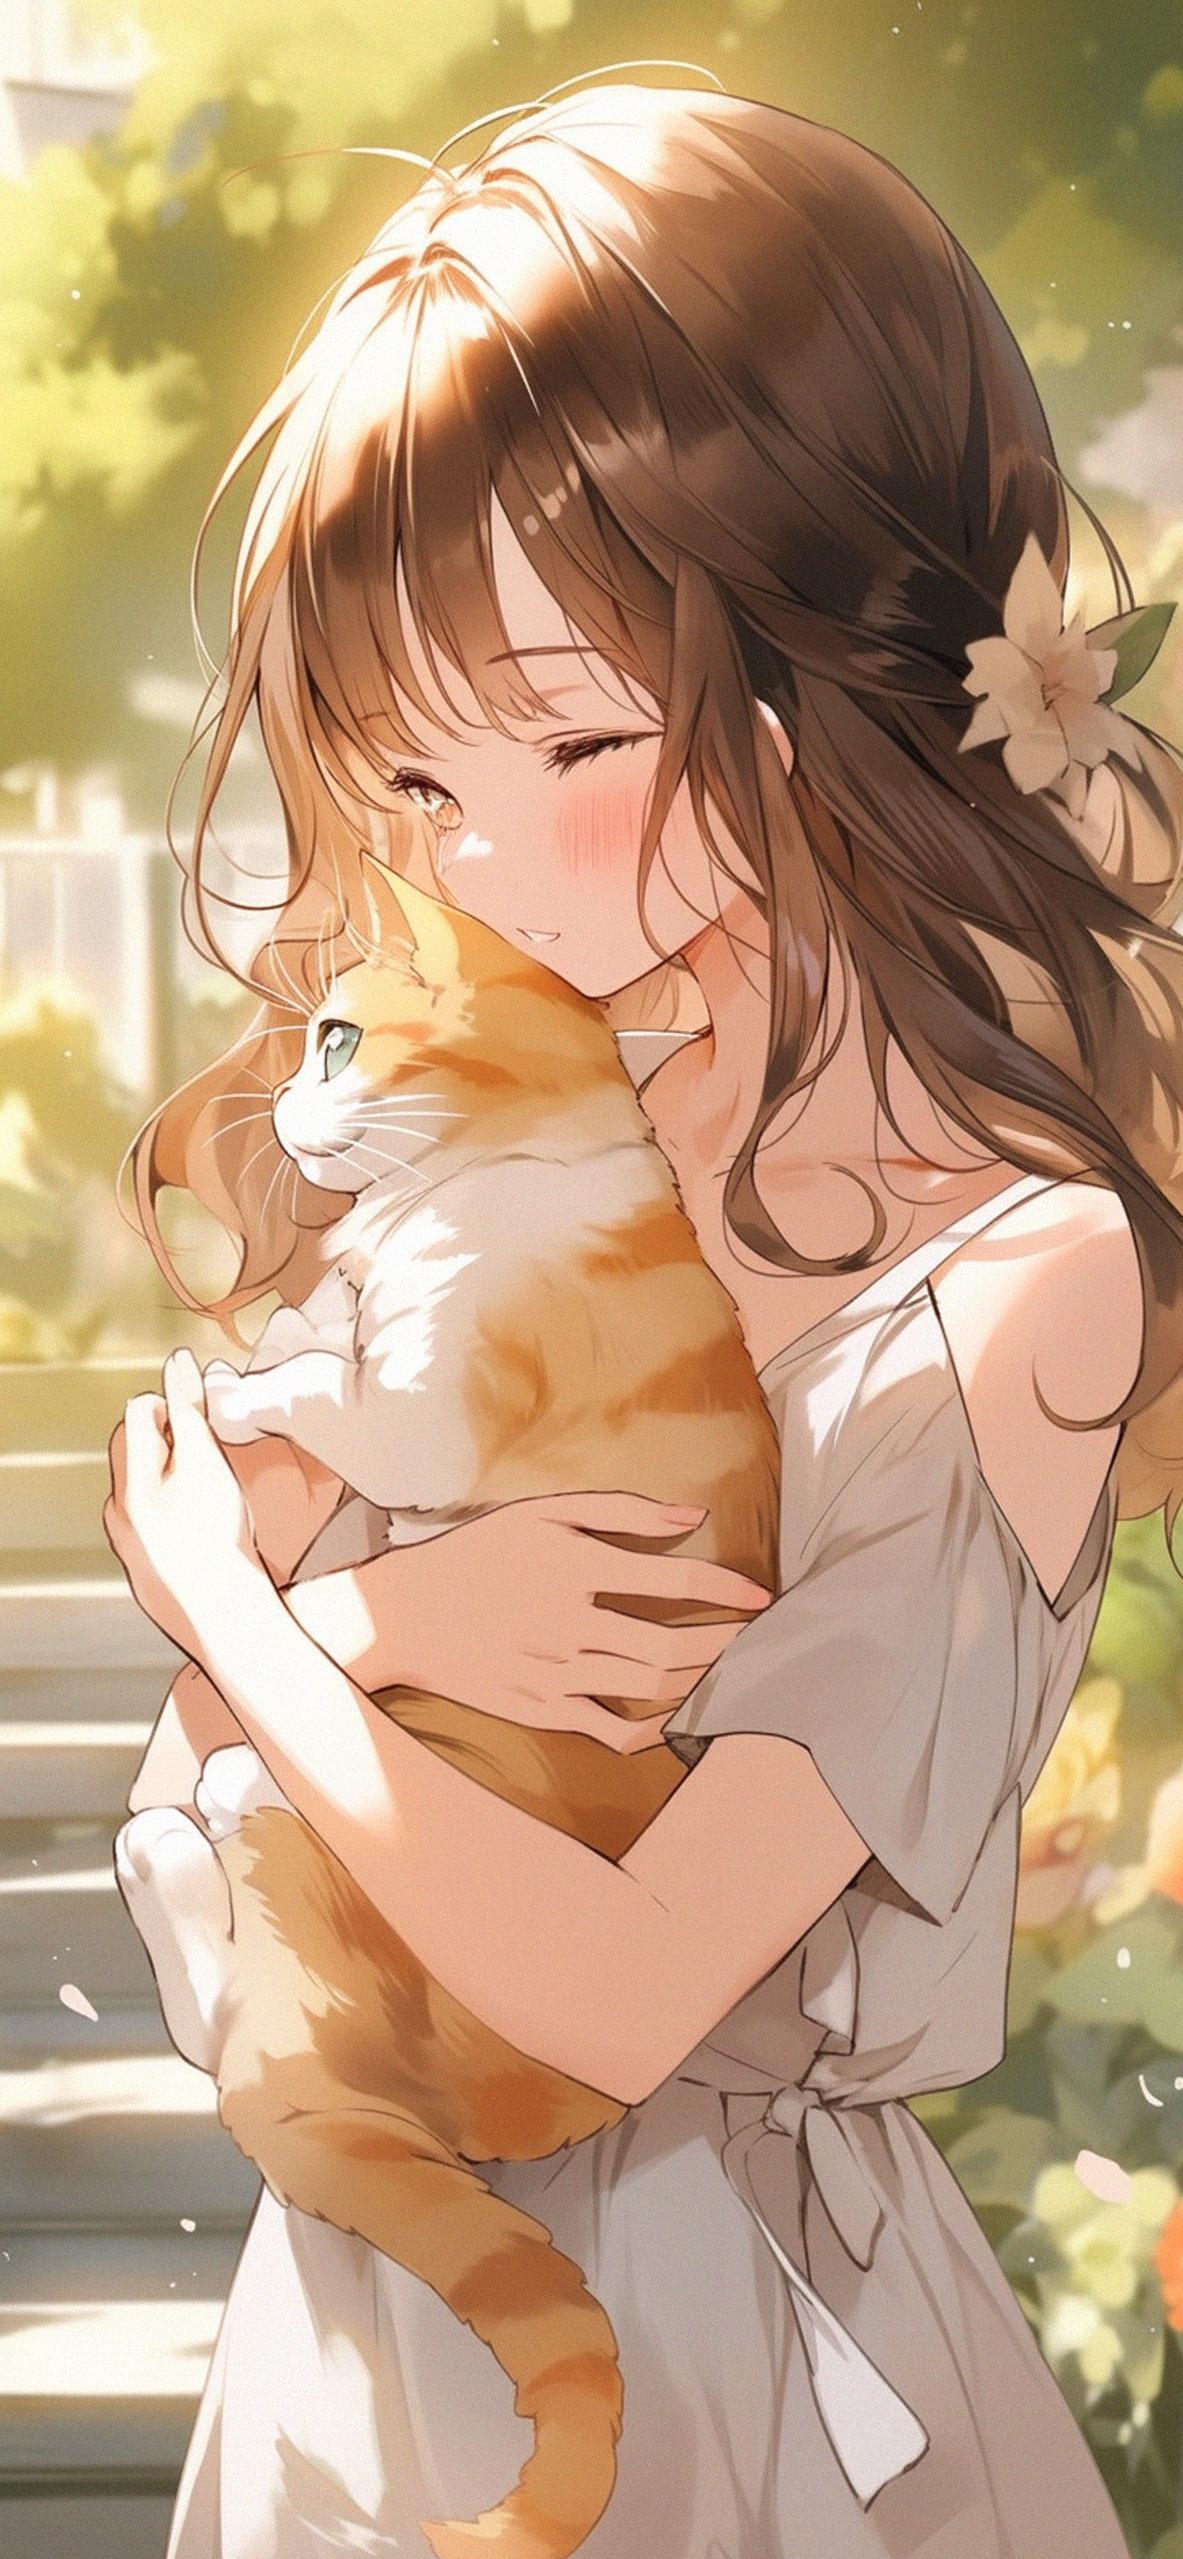 Cute Anime Girl With Cat Wallpaper 4k